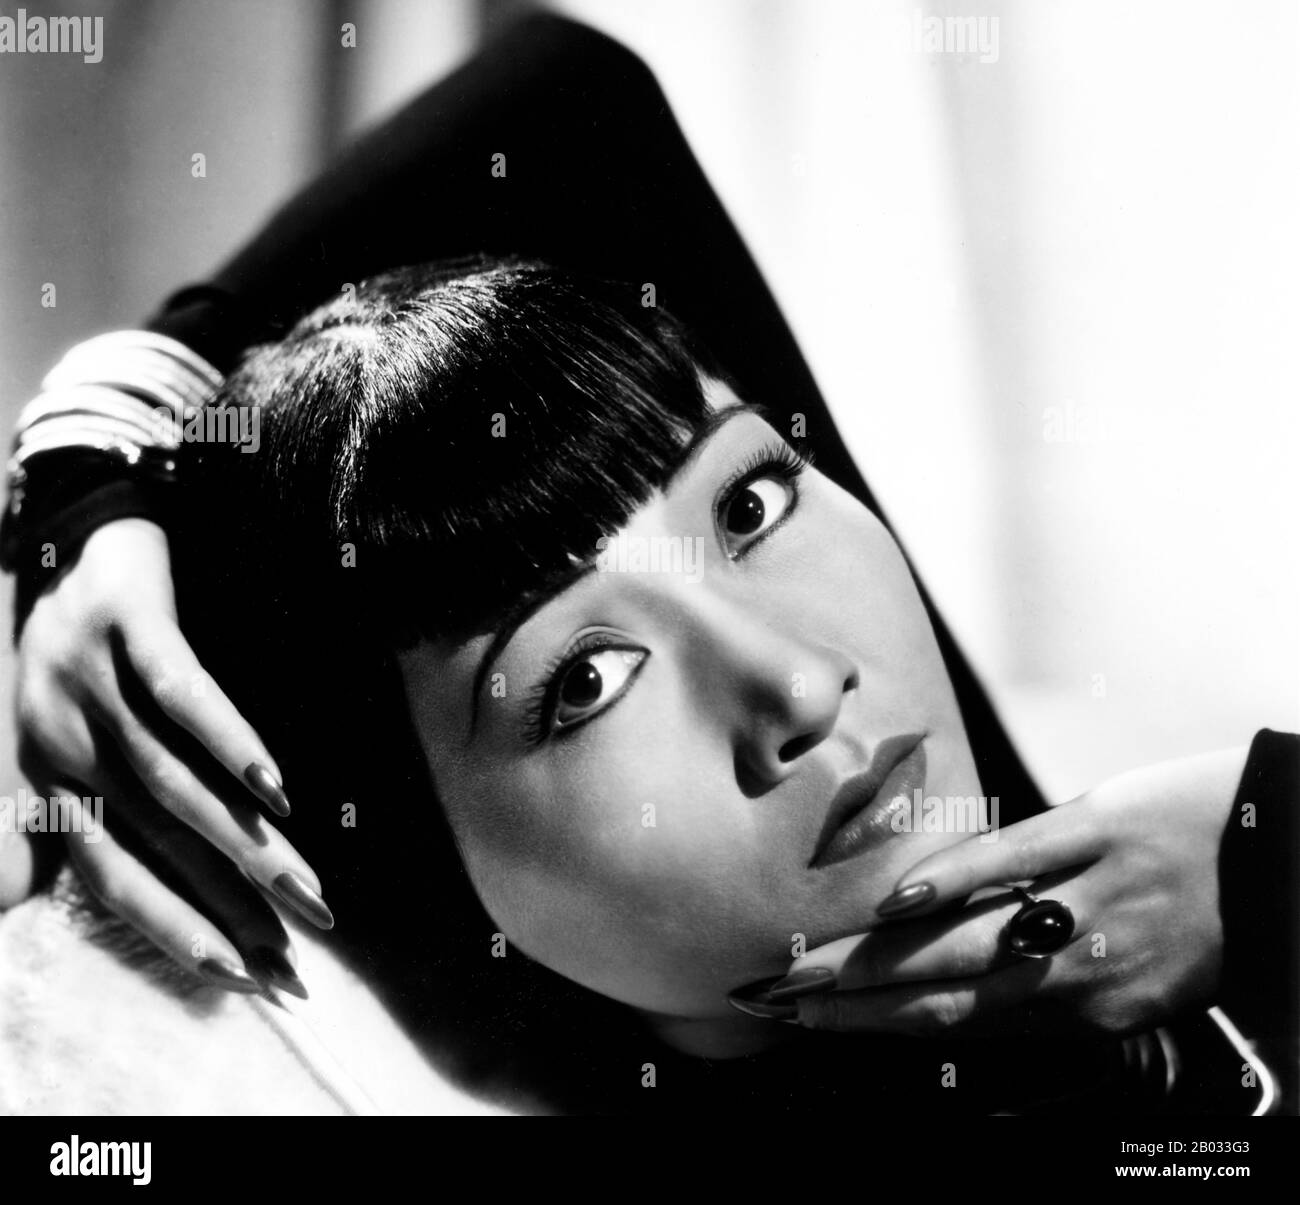 Anna May Wong (January 3, 1905 – February 3, 1961) was an American actress, the first Chinese American movie star, and the first Asian American to become an international star. Her long and varied career spanned both silent and sound film, television, stage, and radio.  Born near the Chinatown neighborhood of Los Angeles to second-generation Chinese-American parents, Wong became infatuated with the movies and began acting in films at an early age. During the silent film era, she acted in The Toll of the Sea (1922), one of the first movies made in color and Douglas Fairbanks' The Thief of Bagda Stock Photo